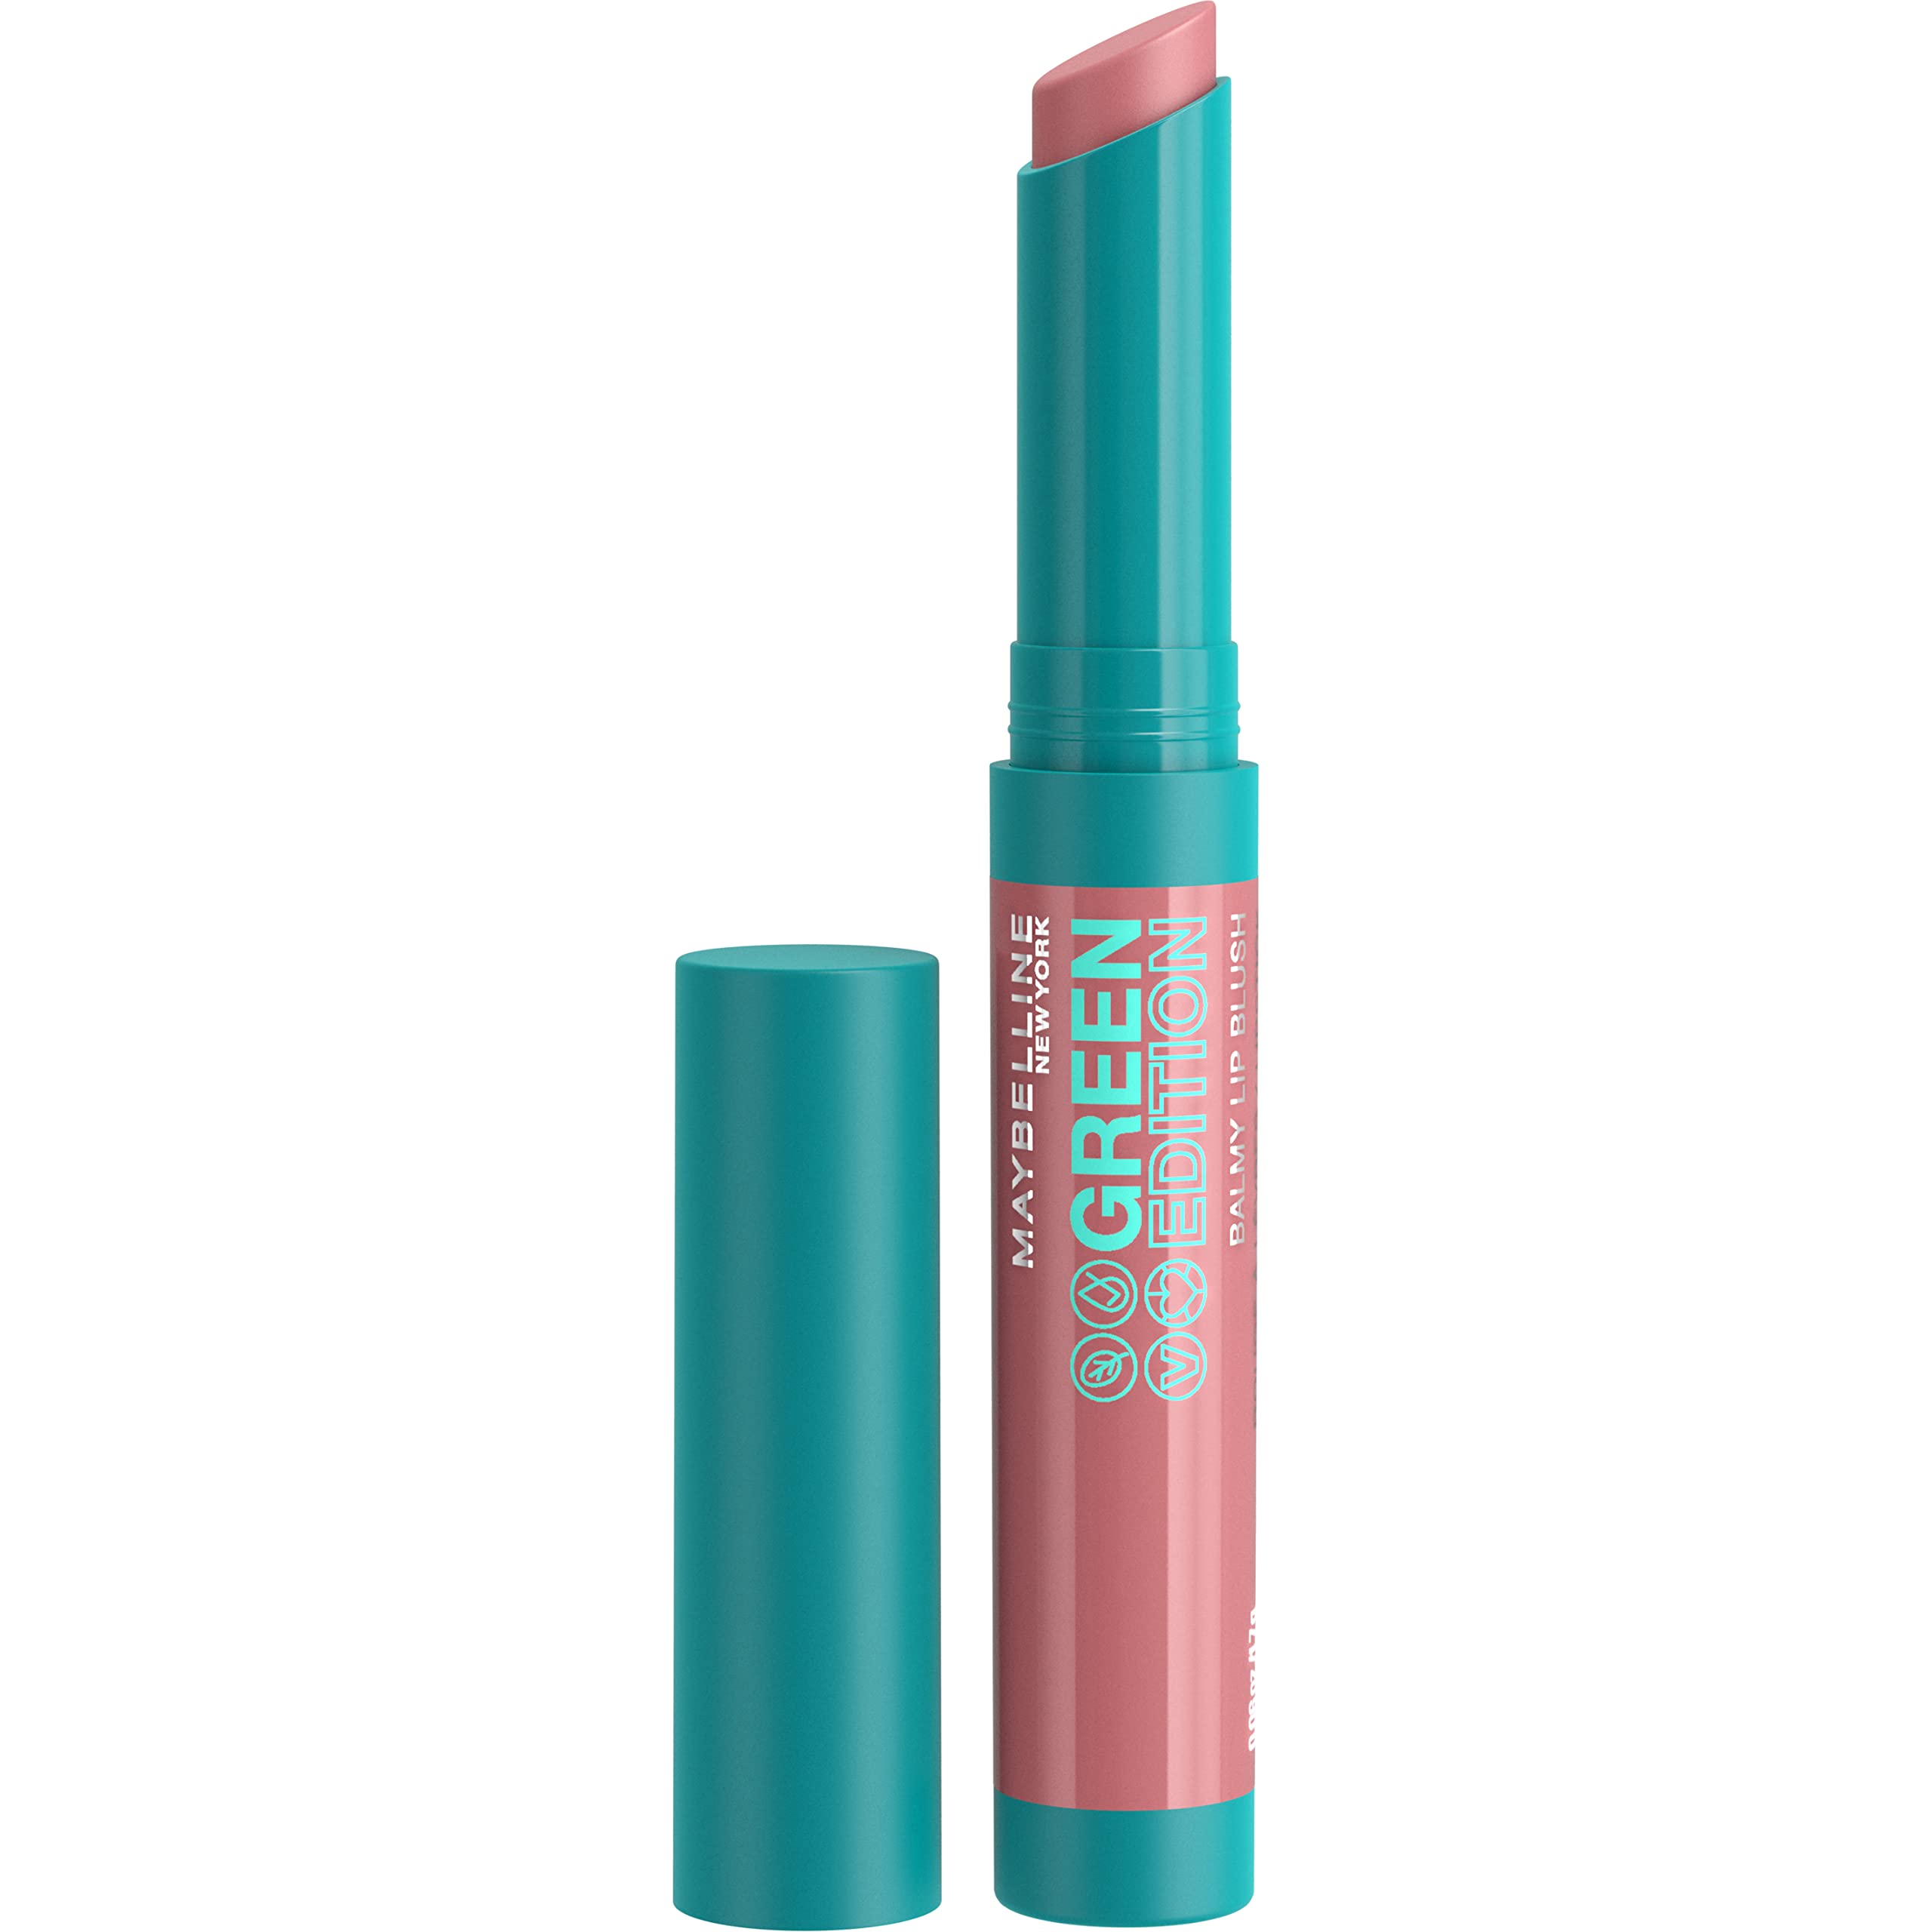 Maybelline Green Edition Balmy Lip Blush Formulated With Mango Oil  Moonlight Pink Nude 1 Count | Foundation